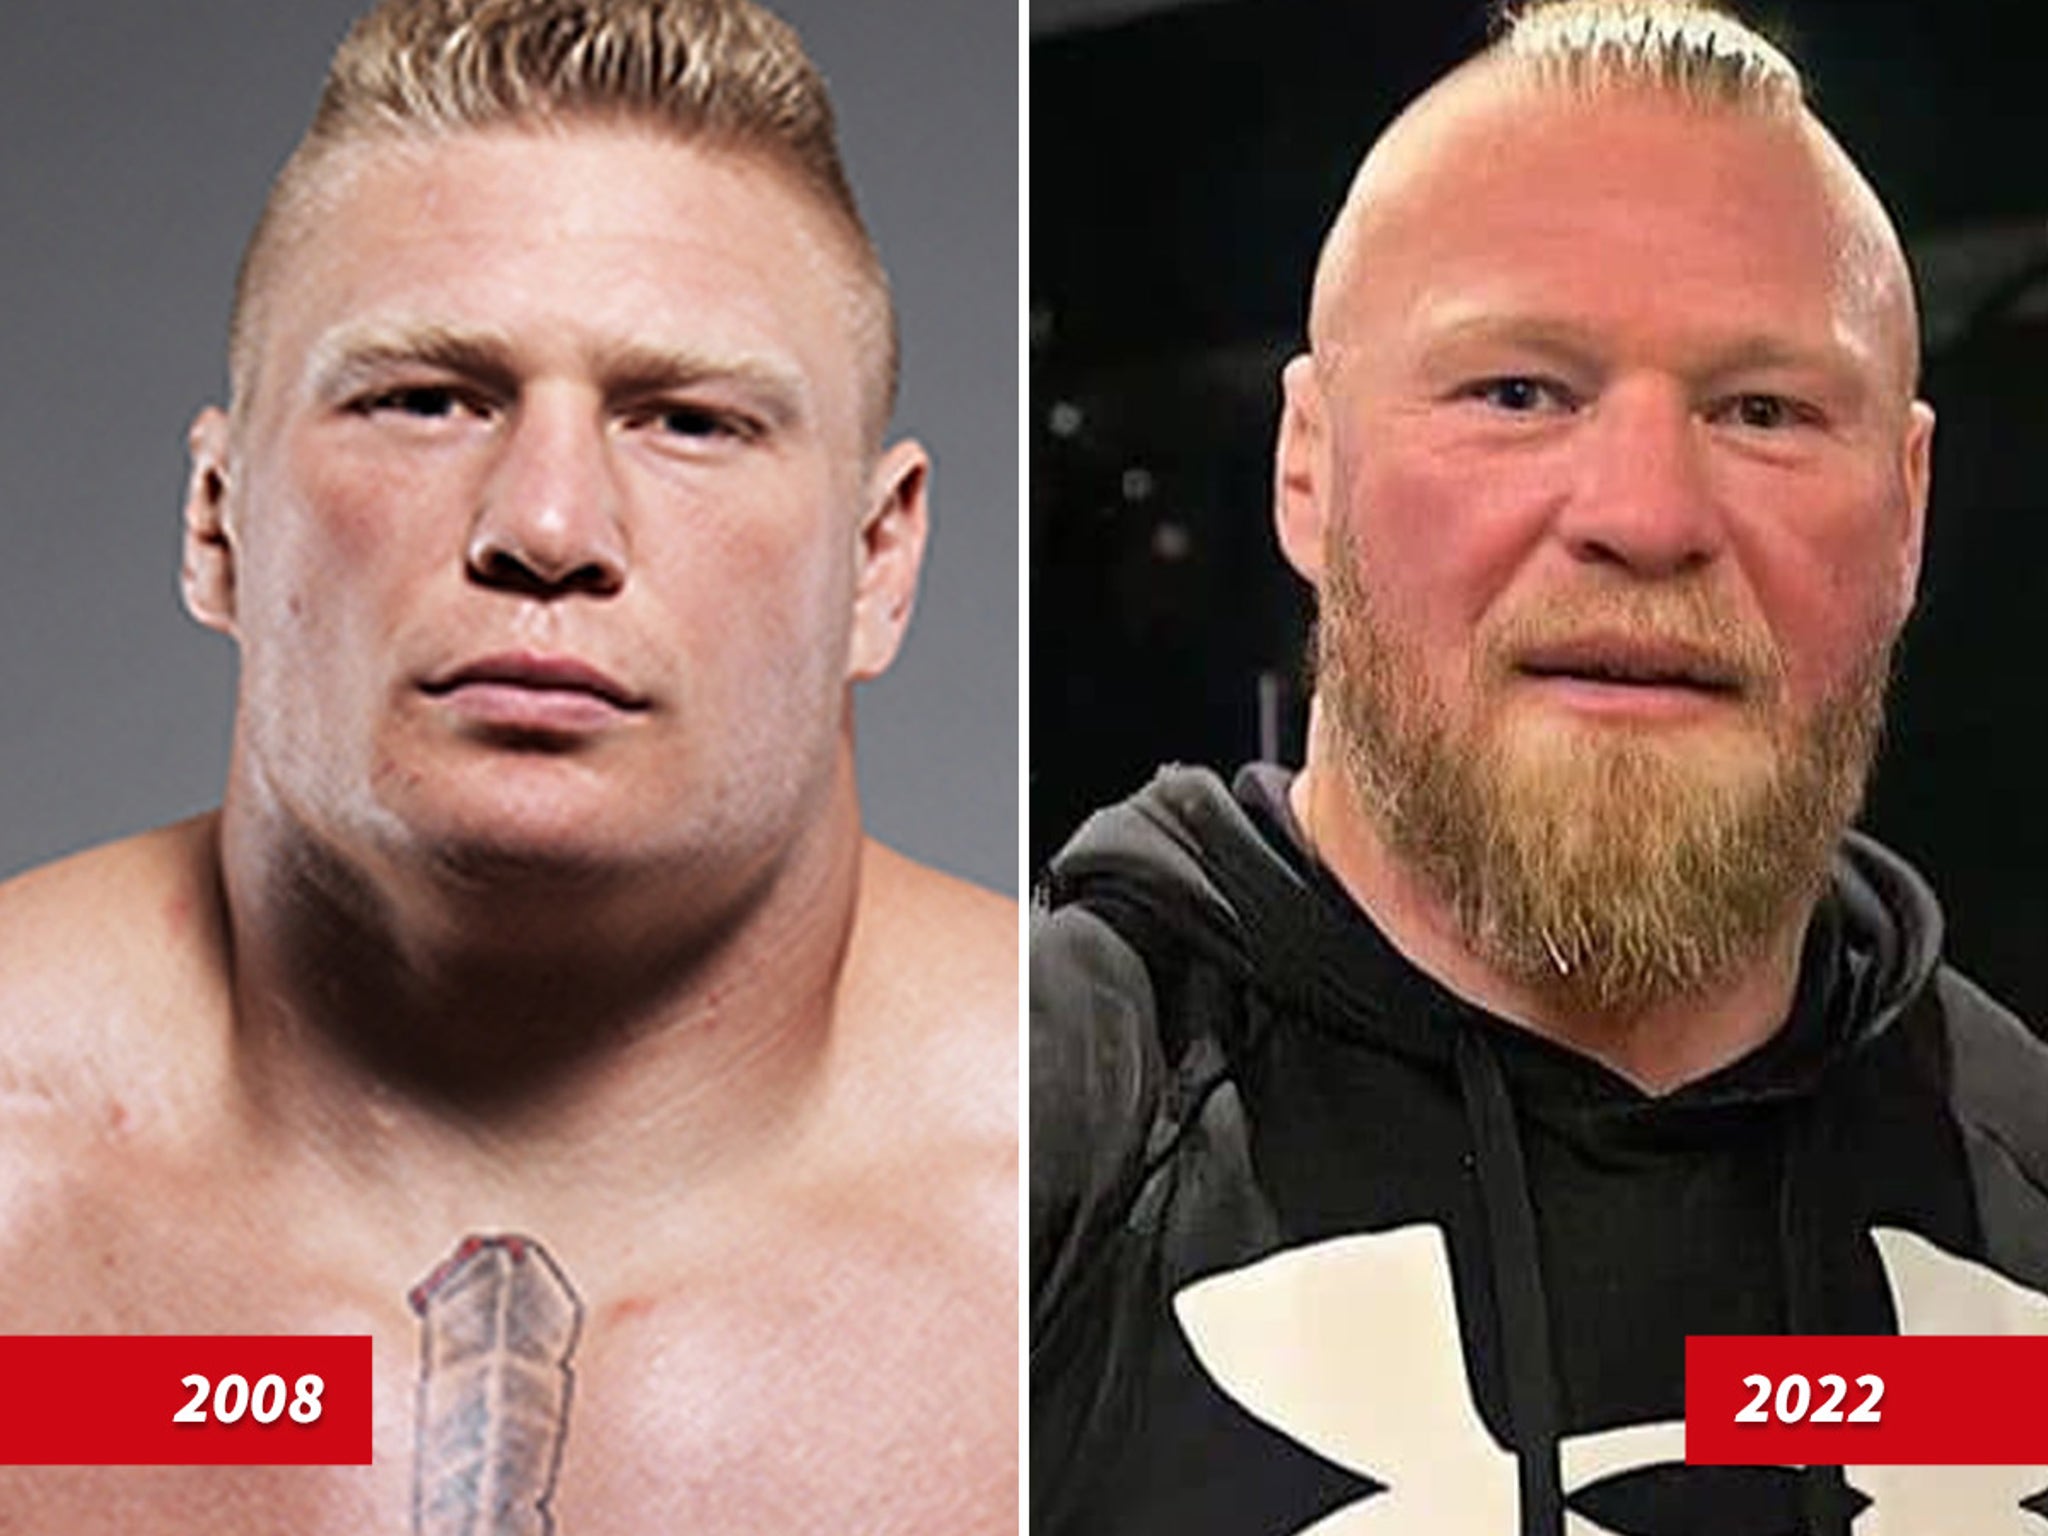 More Photos Of Brock Lesnar's New Look - WWF Old School